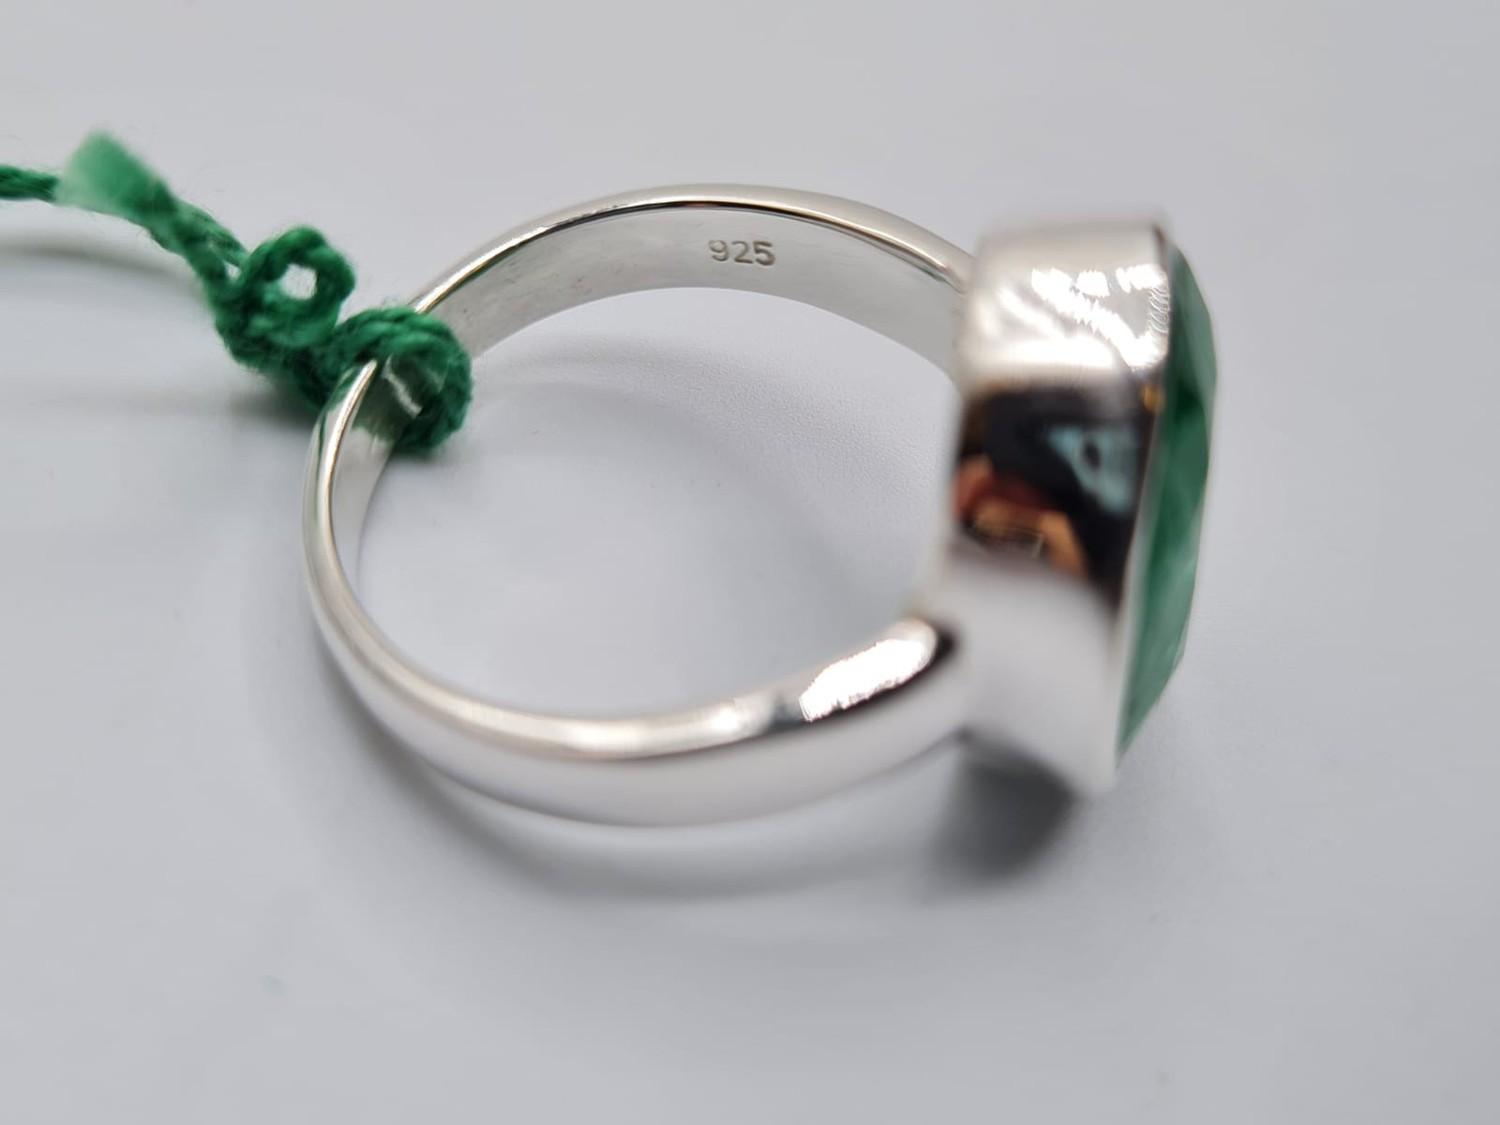 12.66ct emerald stone ring in 925 silver - Image 3 of 3